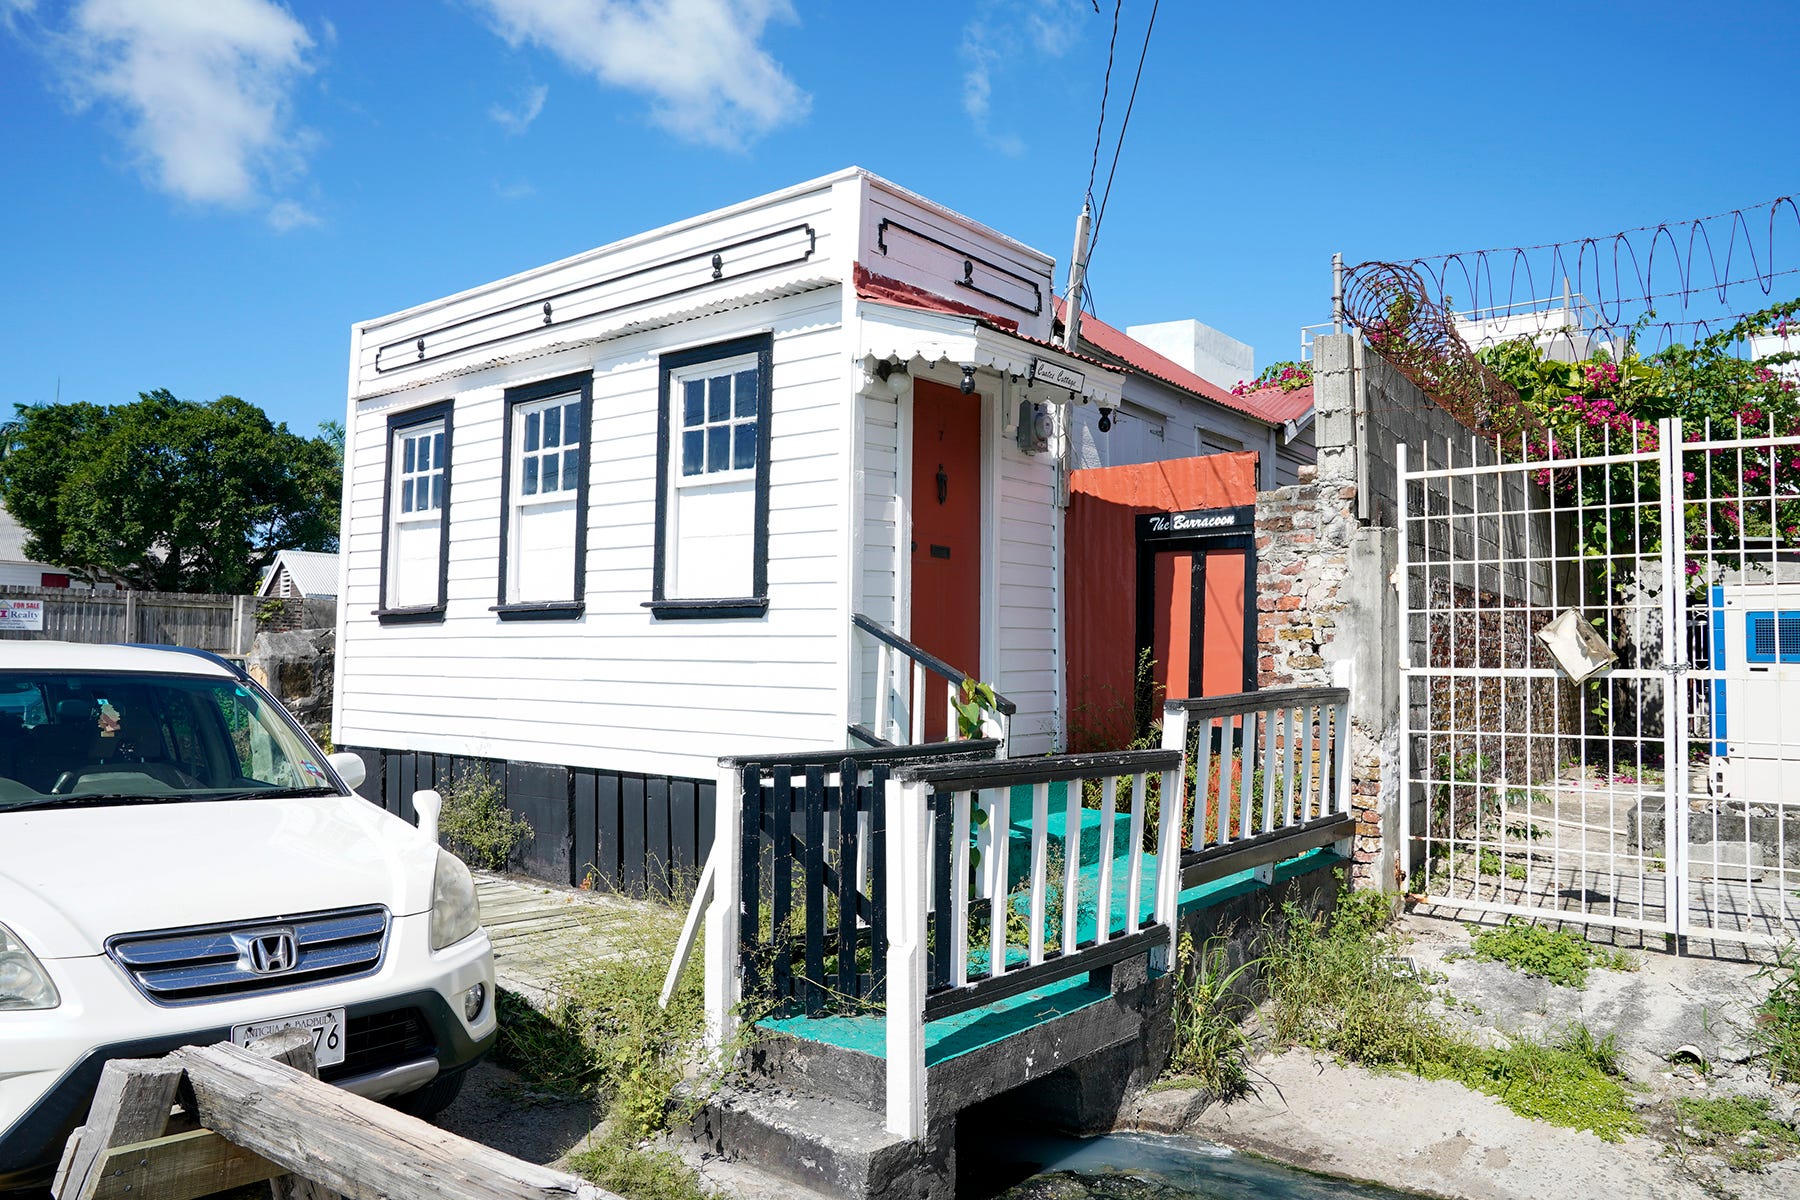 This barracoon in St. John's held enslaved Africans before they were marched a few blocks away to be sold to plantation owners. It's one of several structures related to slavery still standing in the city.